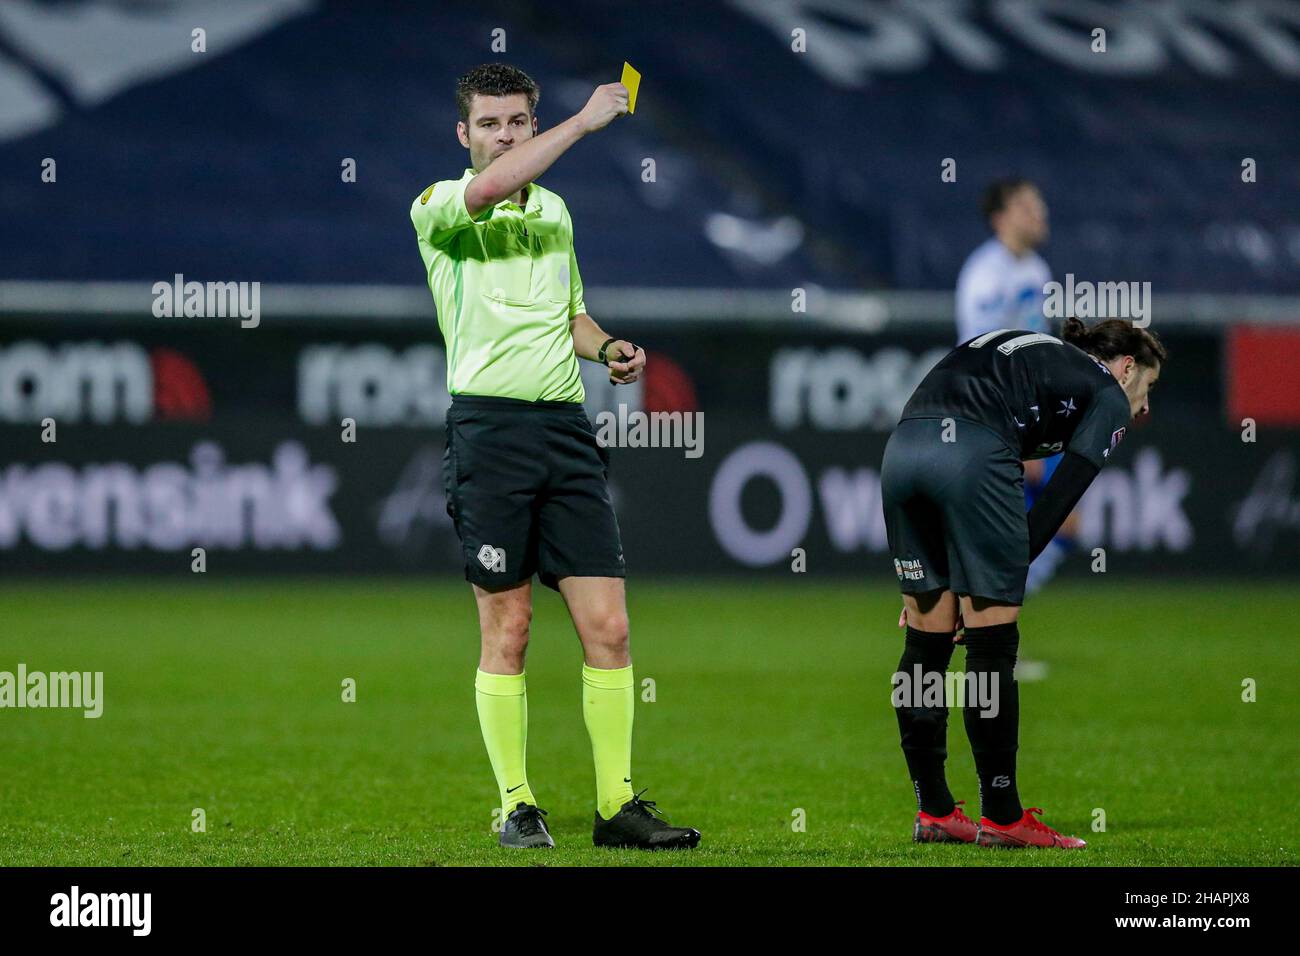 ZWOLLE, NETHERLANDS - DECEMBER 14: referee Erwin Blank shows a yellow card to Destan Bajselmani of PEC Zwolle during the Dutch TOTO KNVB Cup match between PEC Zwolle and MVV Maastricht at MAC 3 Park Stadion on December 14, 2021 in Zwolle, Netherlands (Photo by Peter Lous/Orange Pictures) Stock Photo